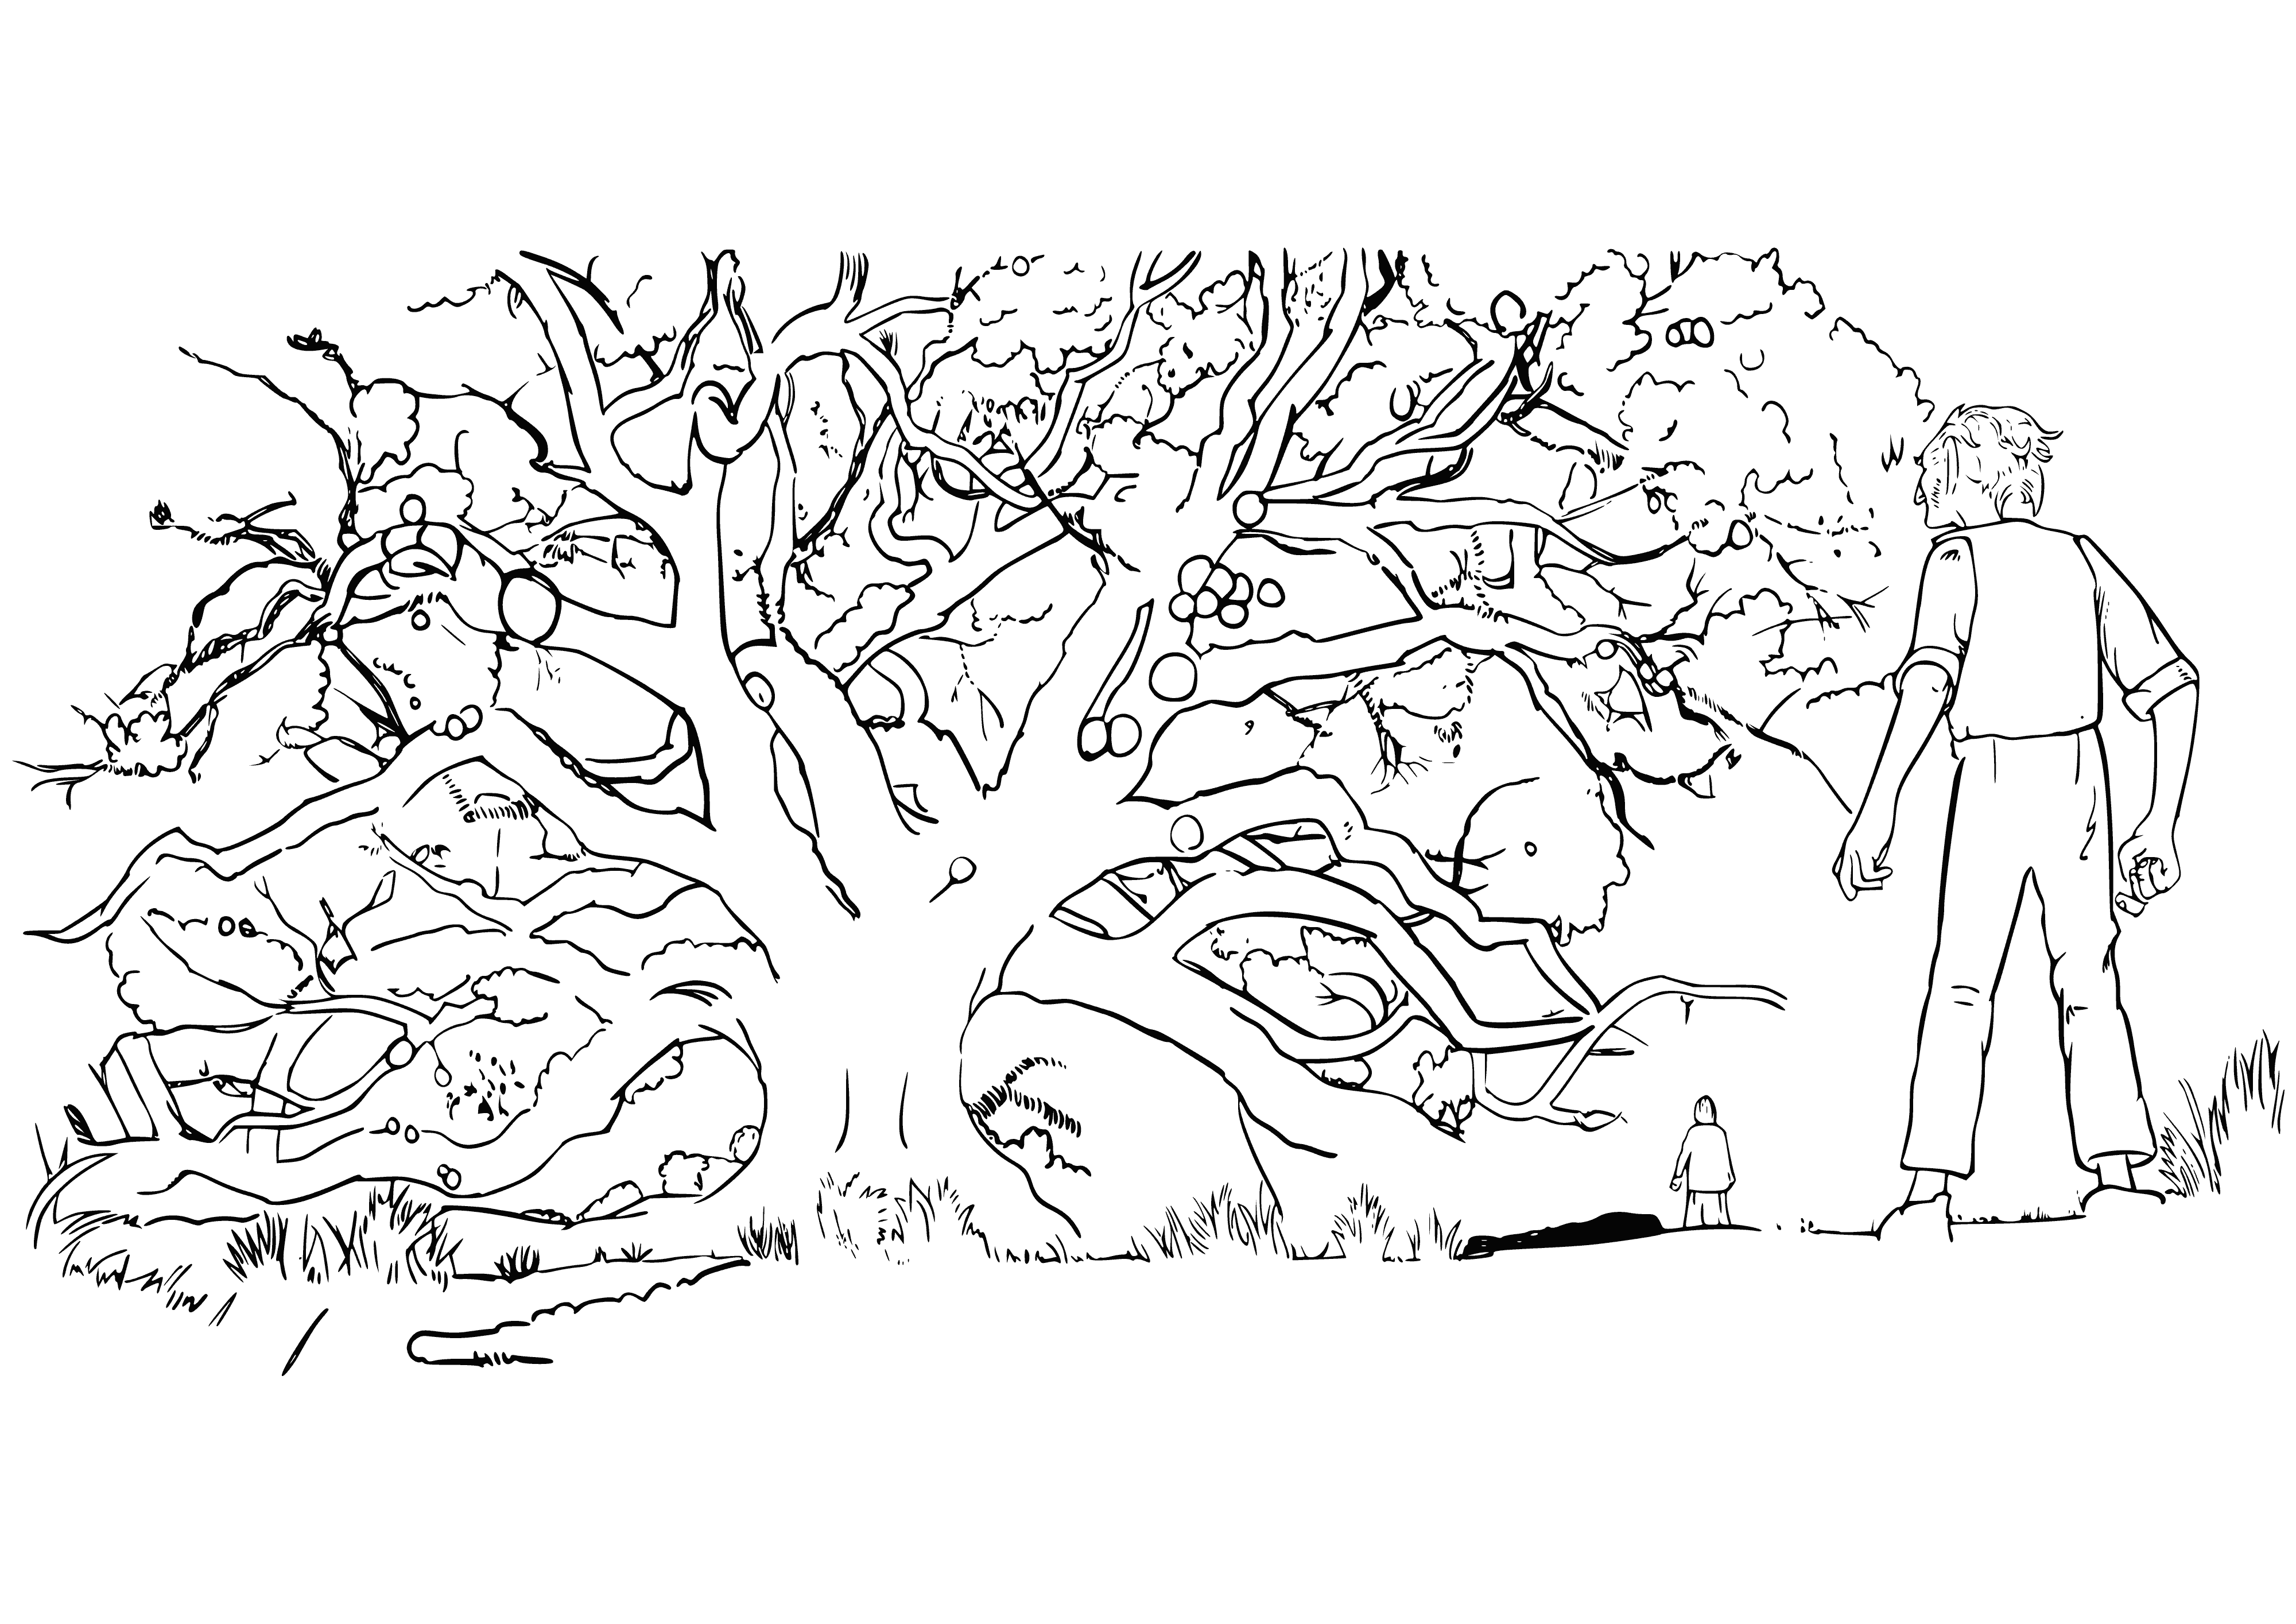 coloring page: A tree w/large pink flower in center & spiral pattern, w/leaves, branches, and 4 pink balls. Five smaller flowers in yellow, pink, & purple.